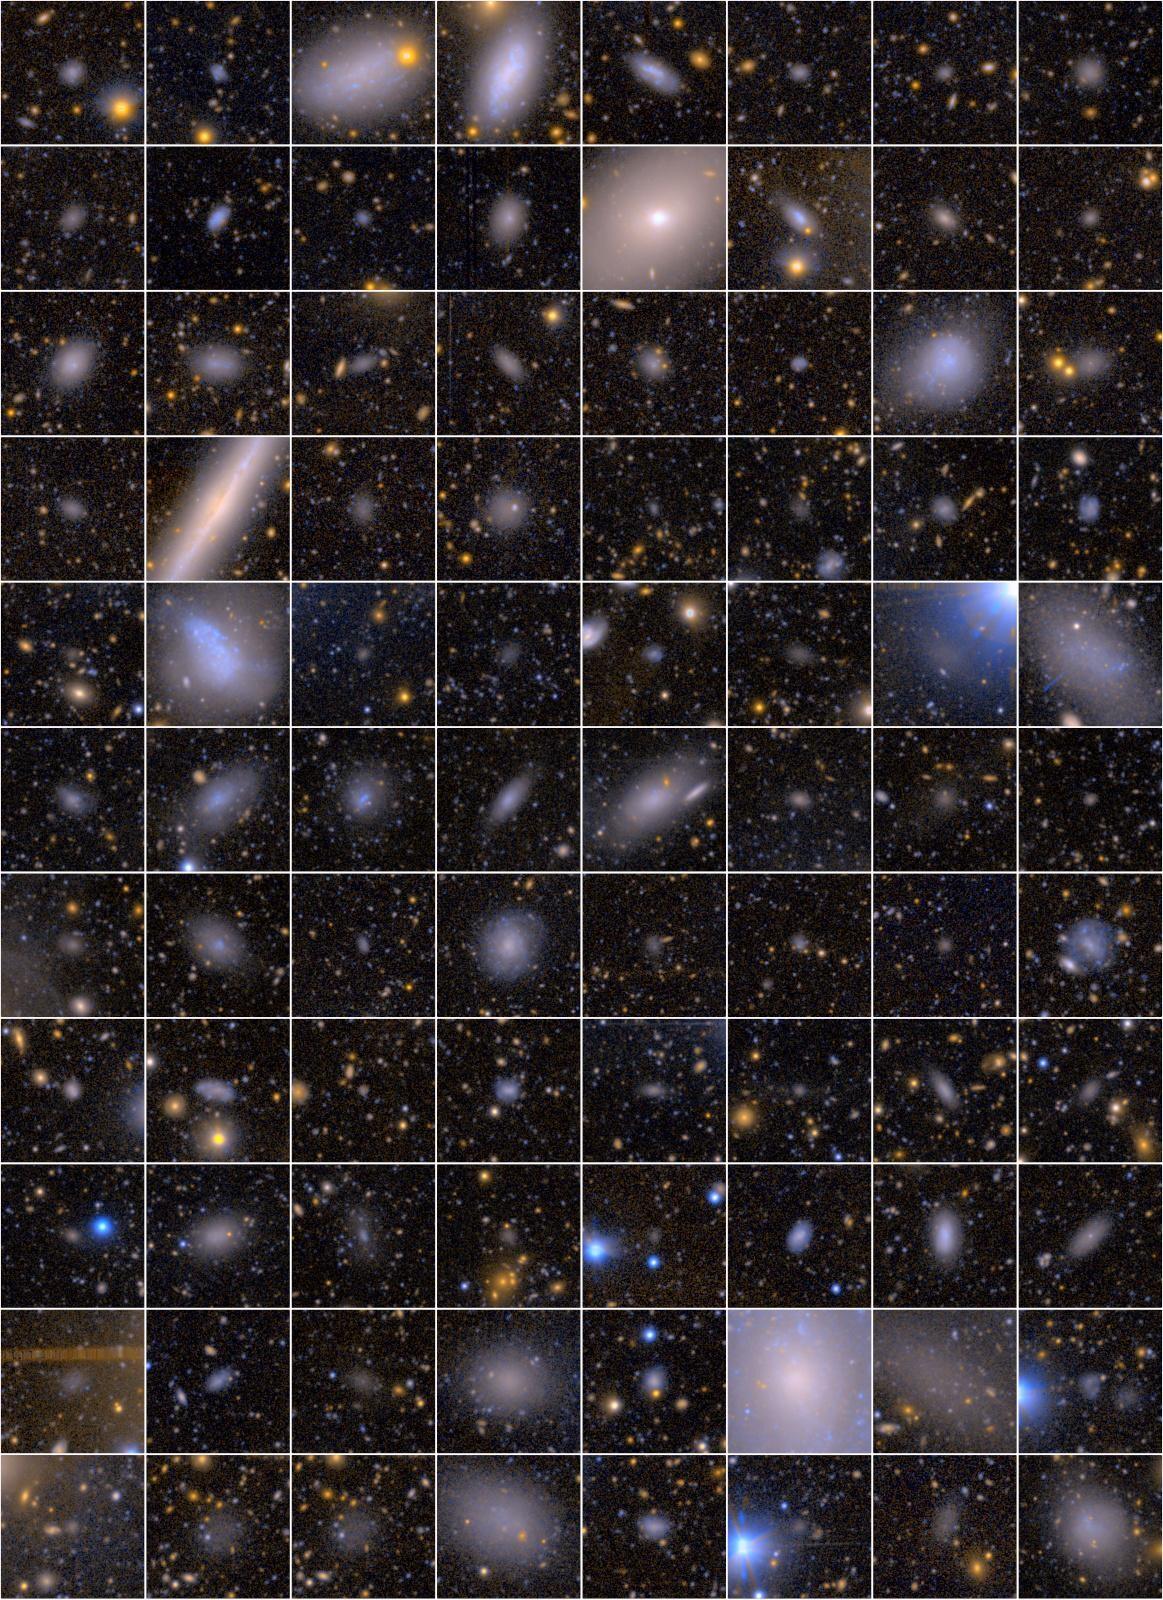 A view of different satellite galaxies. Satellite galaxies are typically faint and extended. Image Credit: NAOJ.